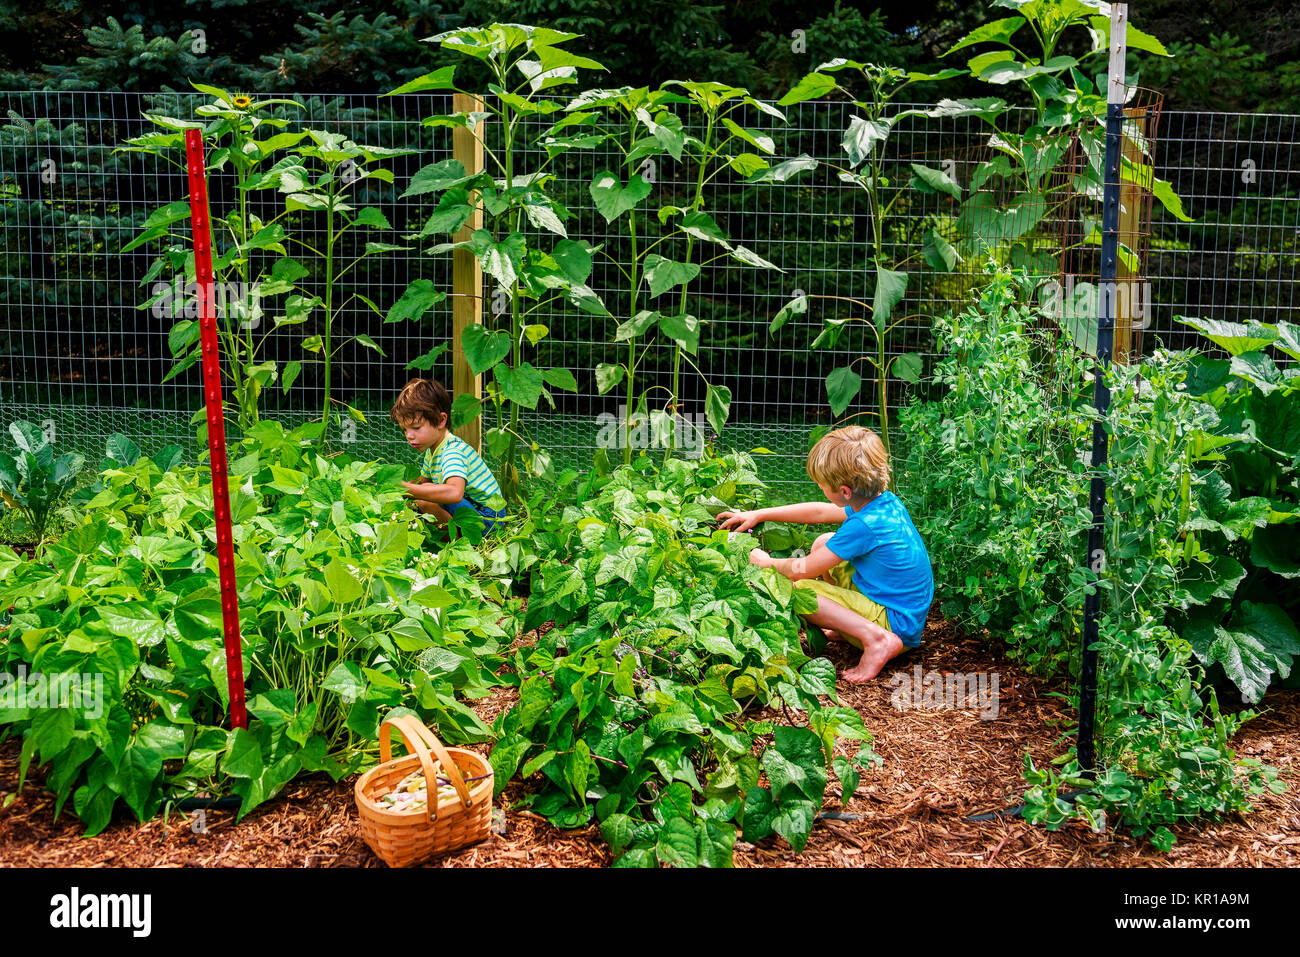 Two boys in a vegetable patch picking vegetables Stock Photo